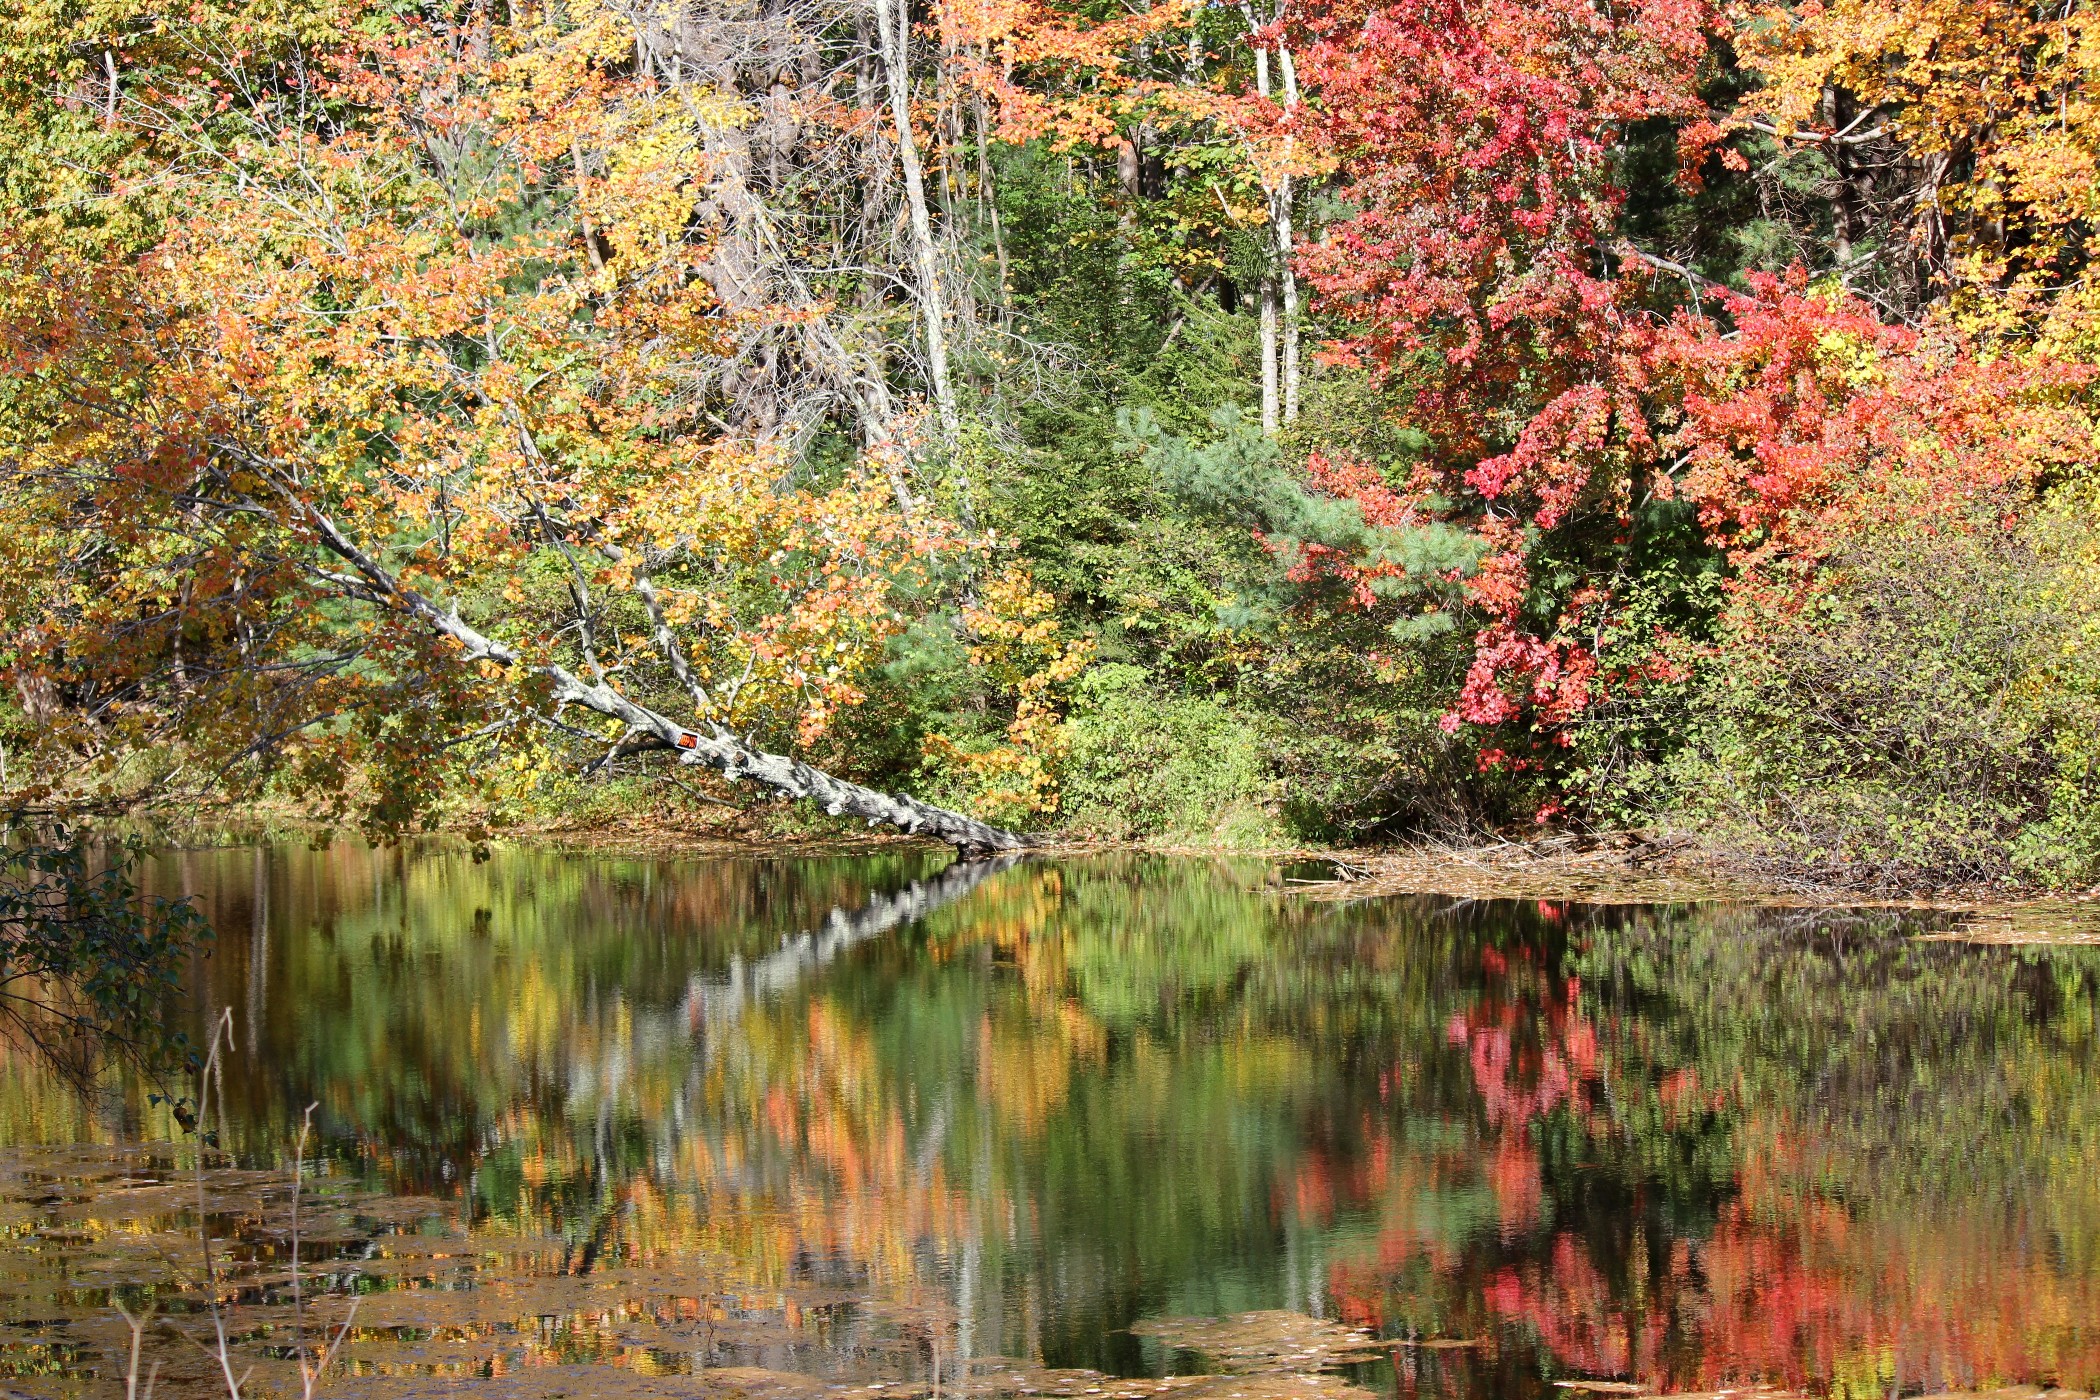 Fall Foliage On Ogunquit Pond (user submitted)